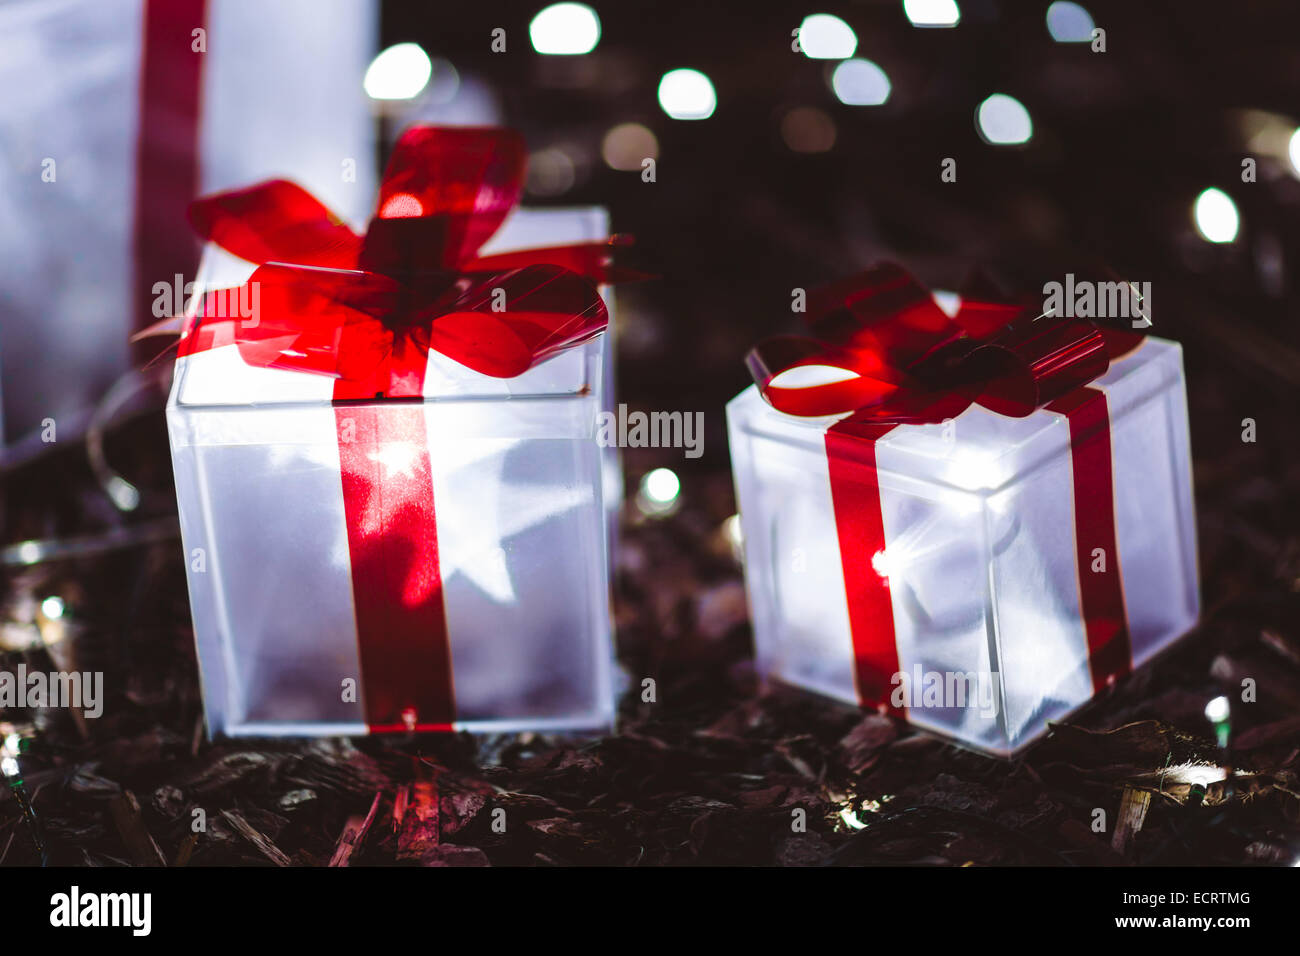 Glowing Christmas gifts under tree Stock Photo